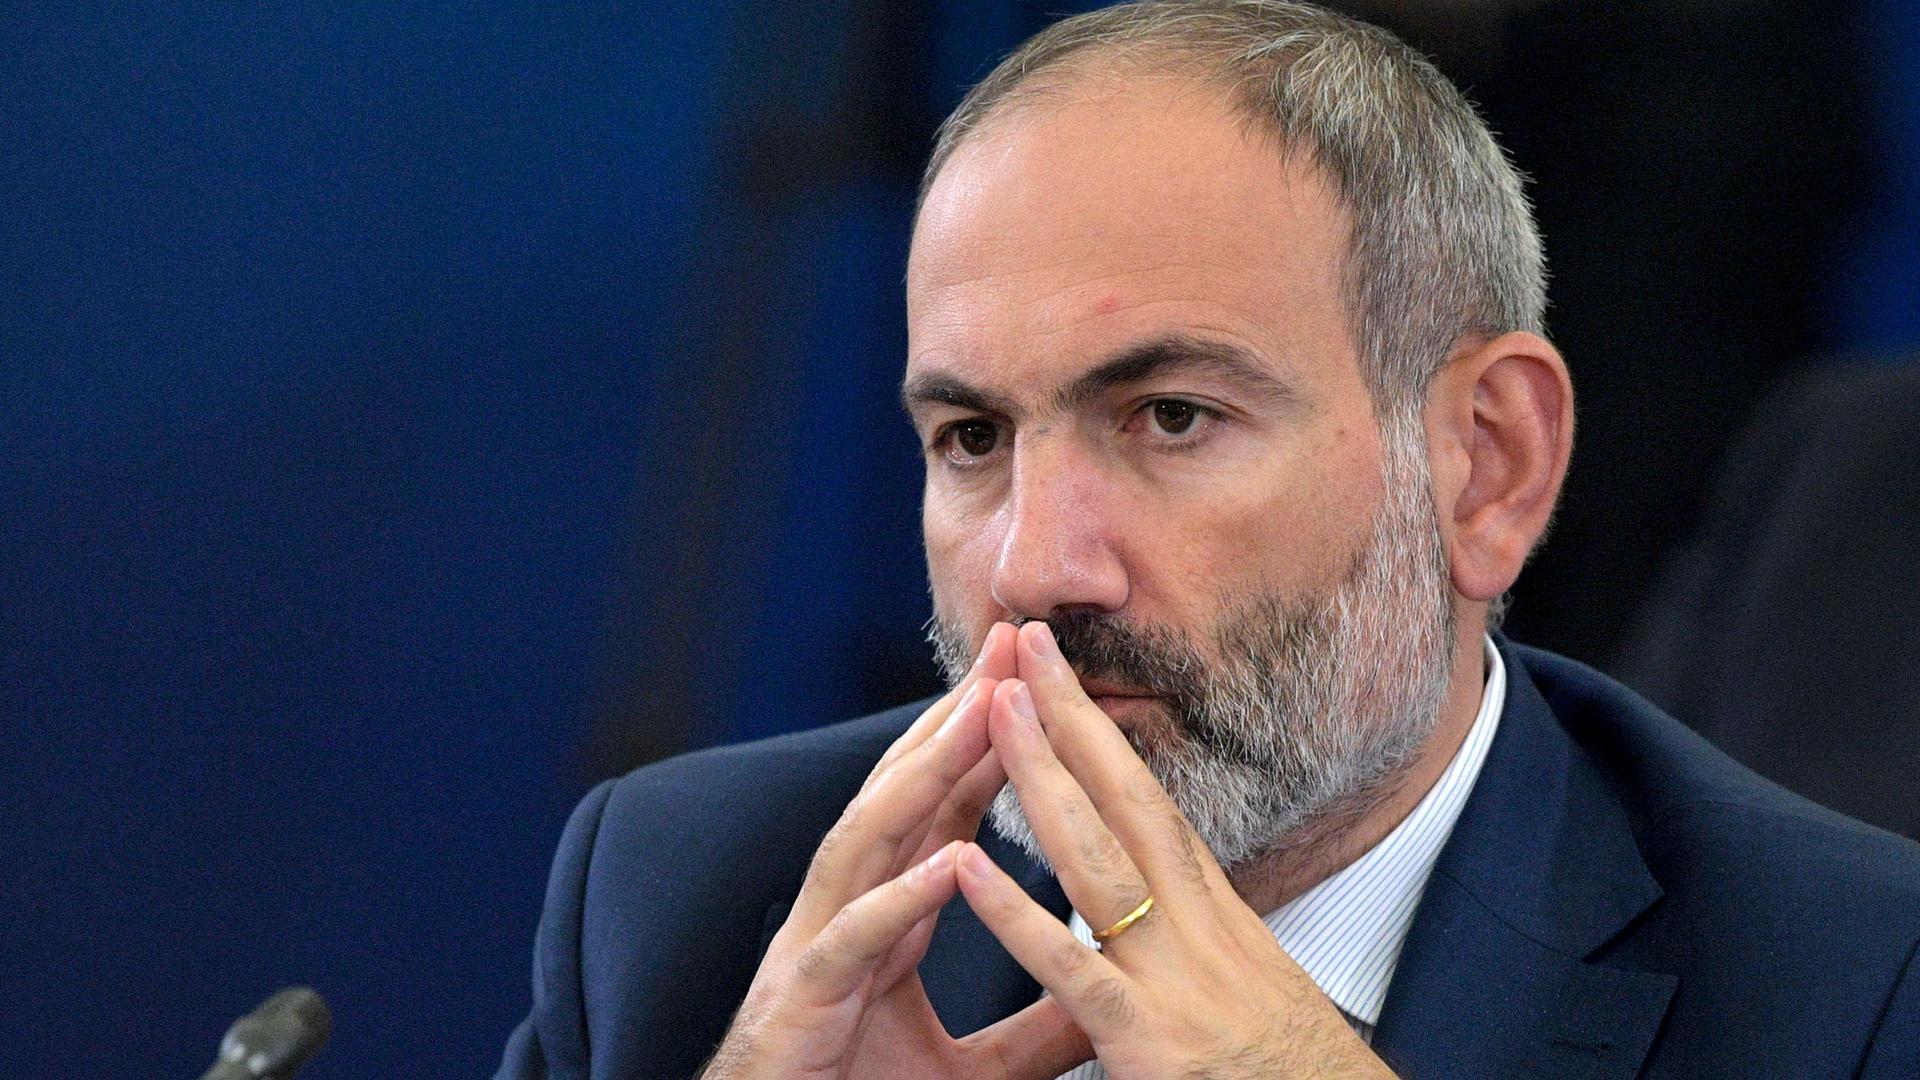 Armenian Prime Minister Nikol Pashinyan is shown with the fingertips of his hands pressed against each other and next to his mouth.